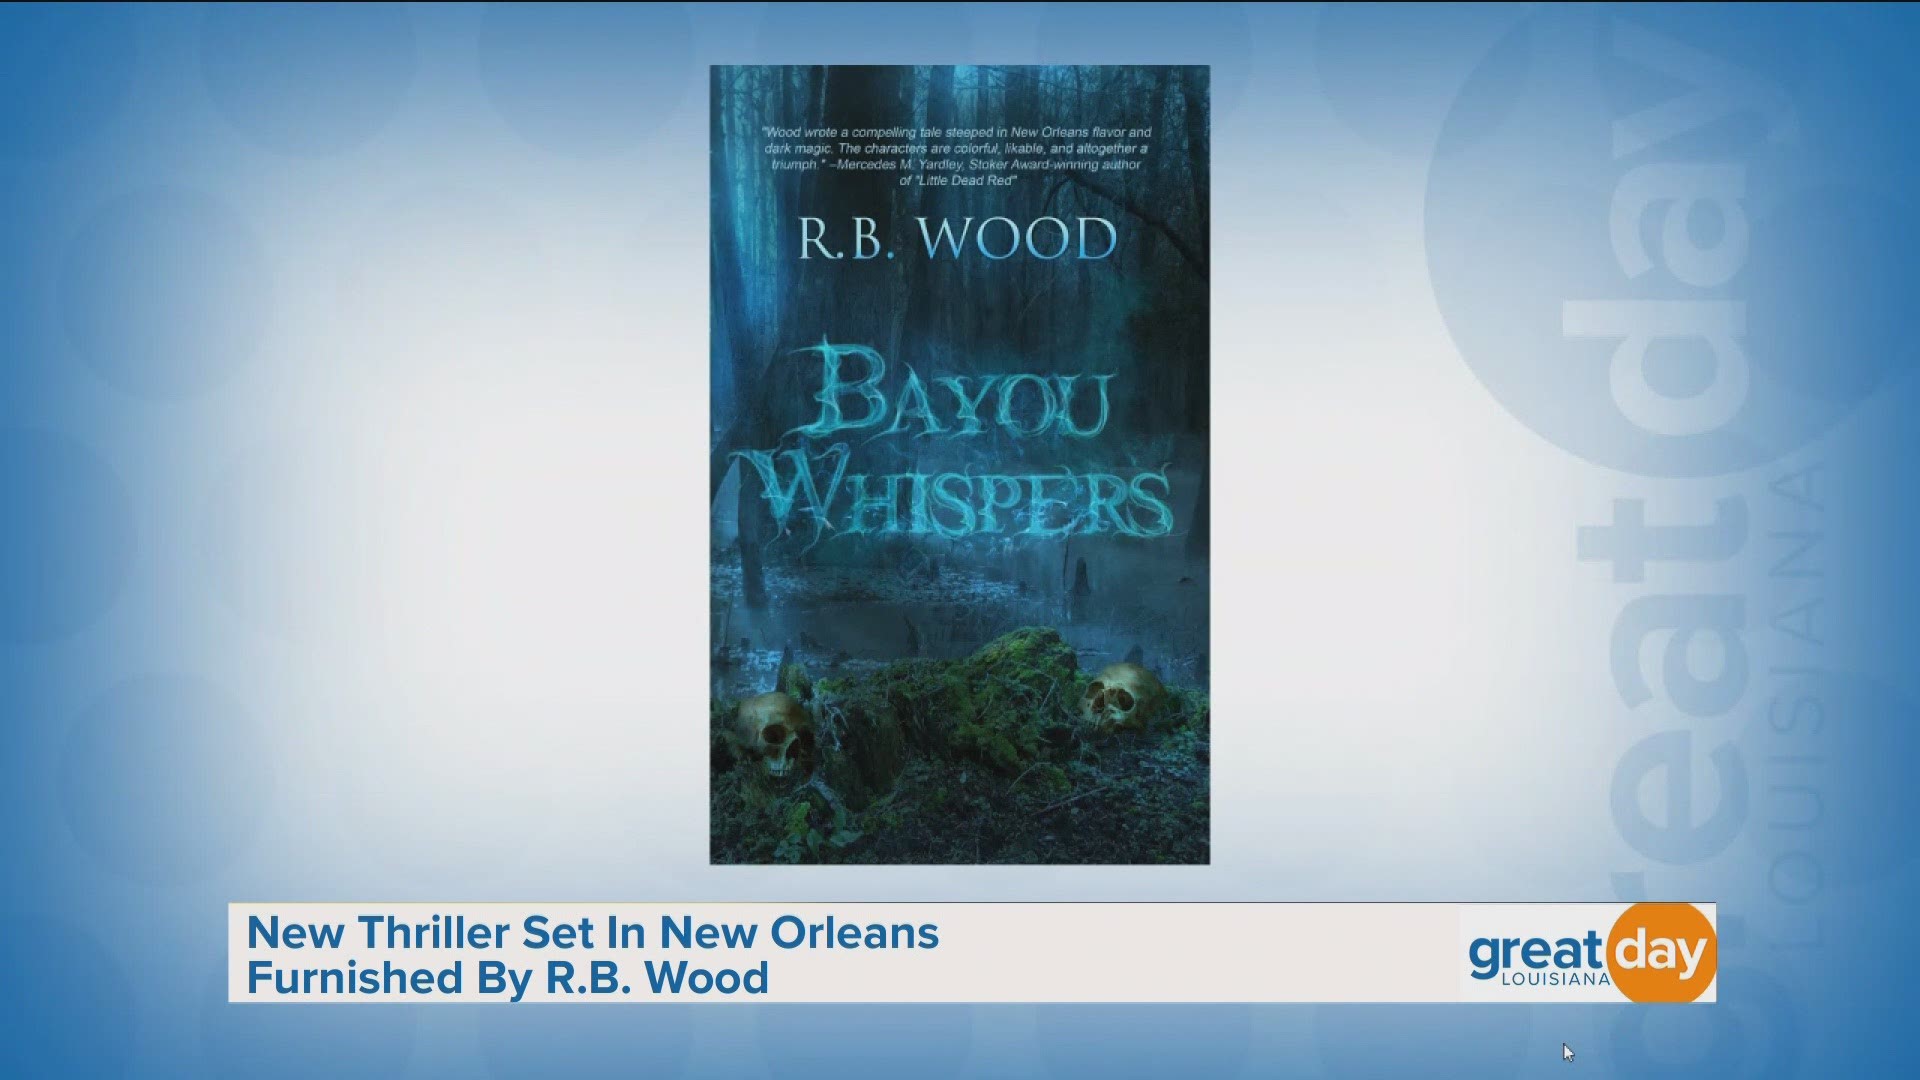 The author of "Bayou Whispers" discussed his new thriller and his virtual book tour.